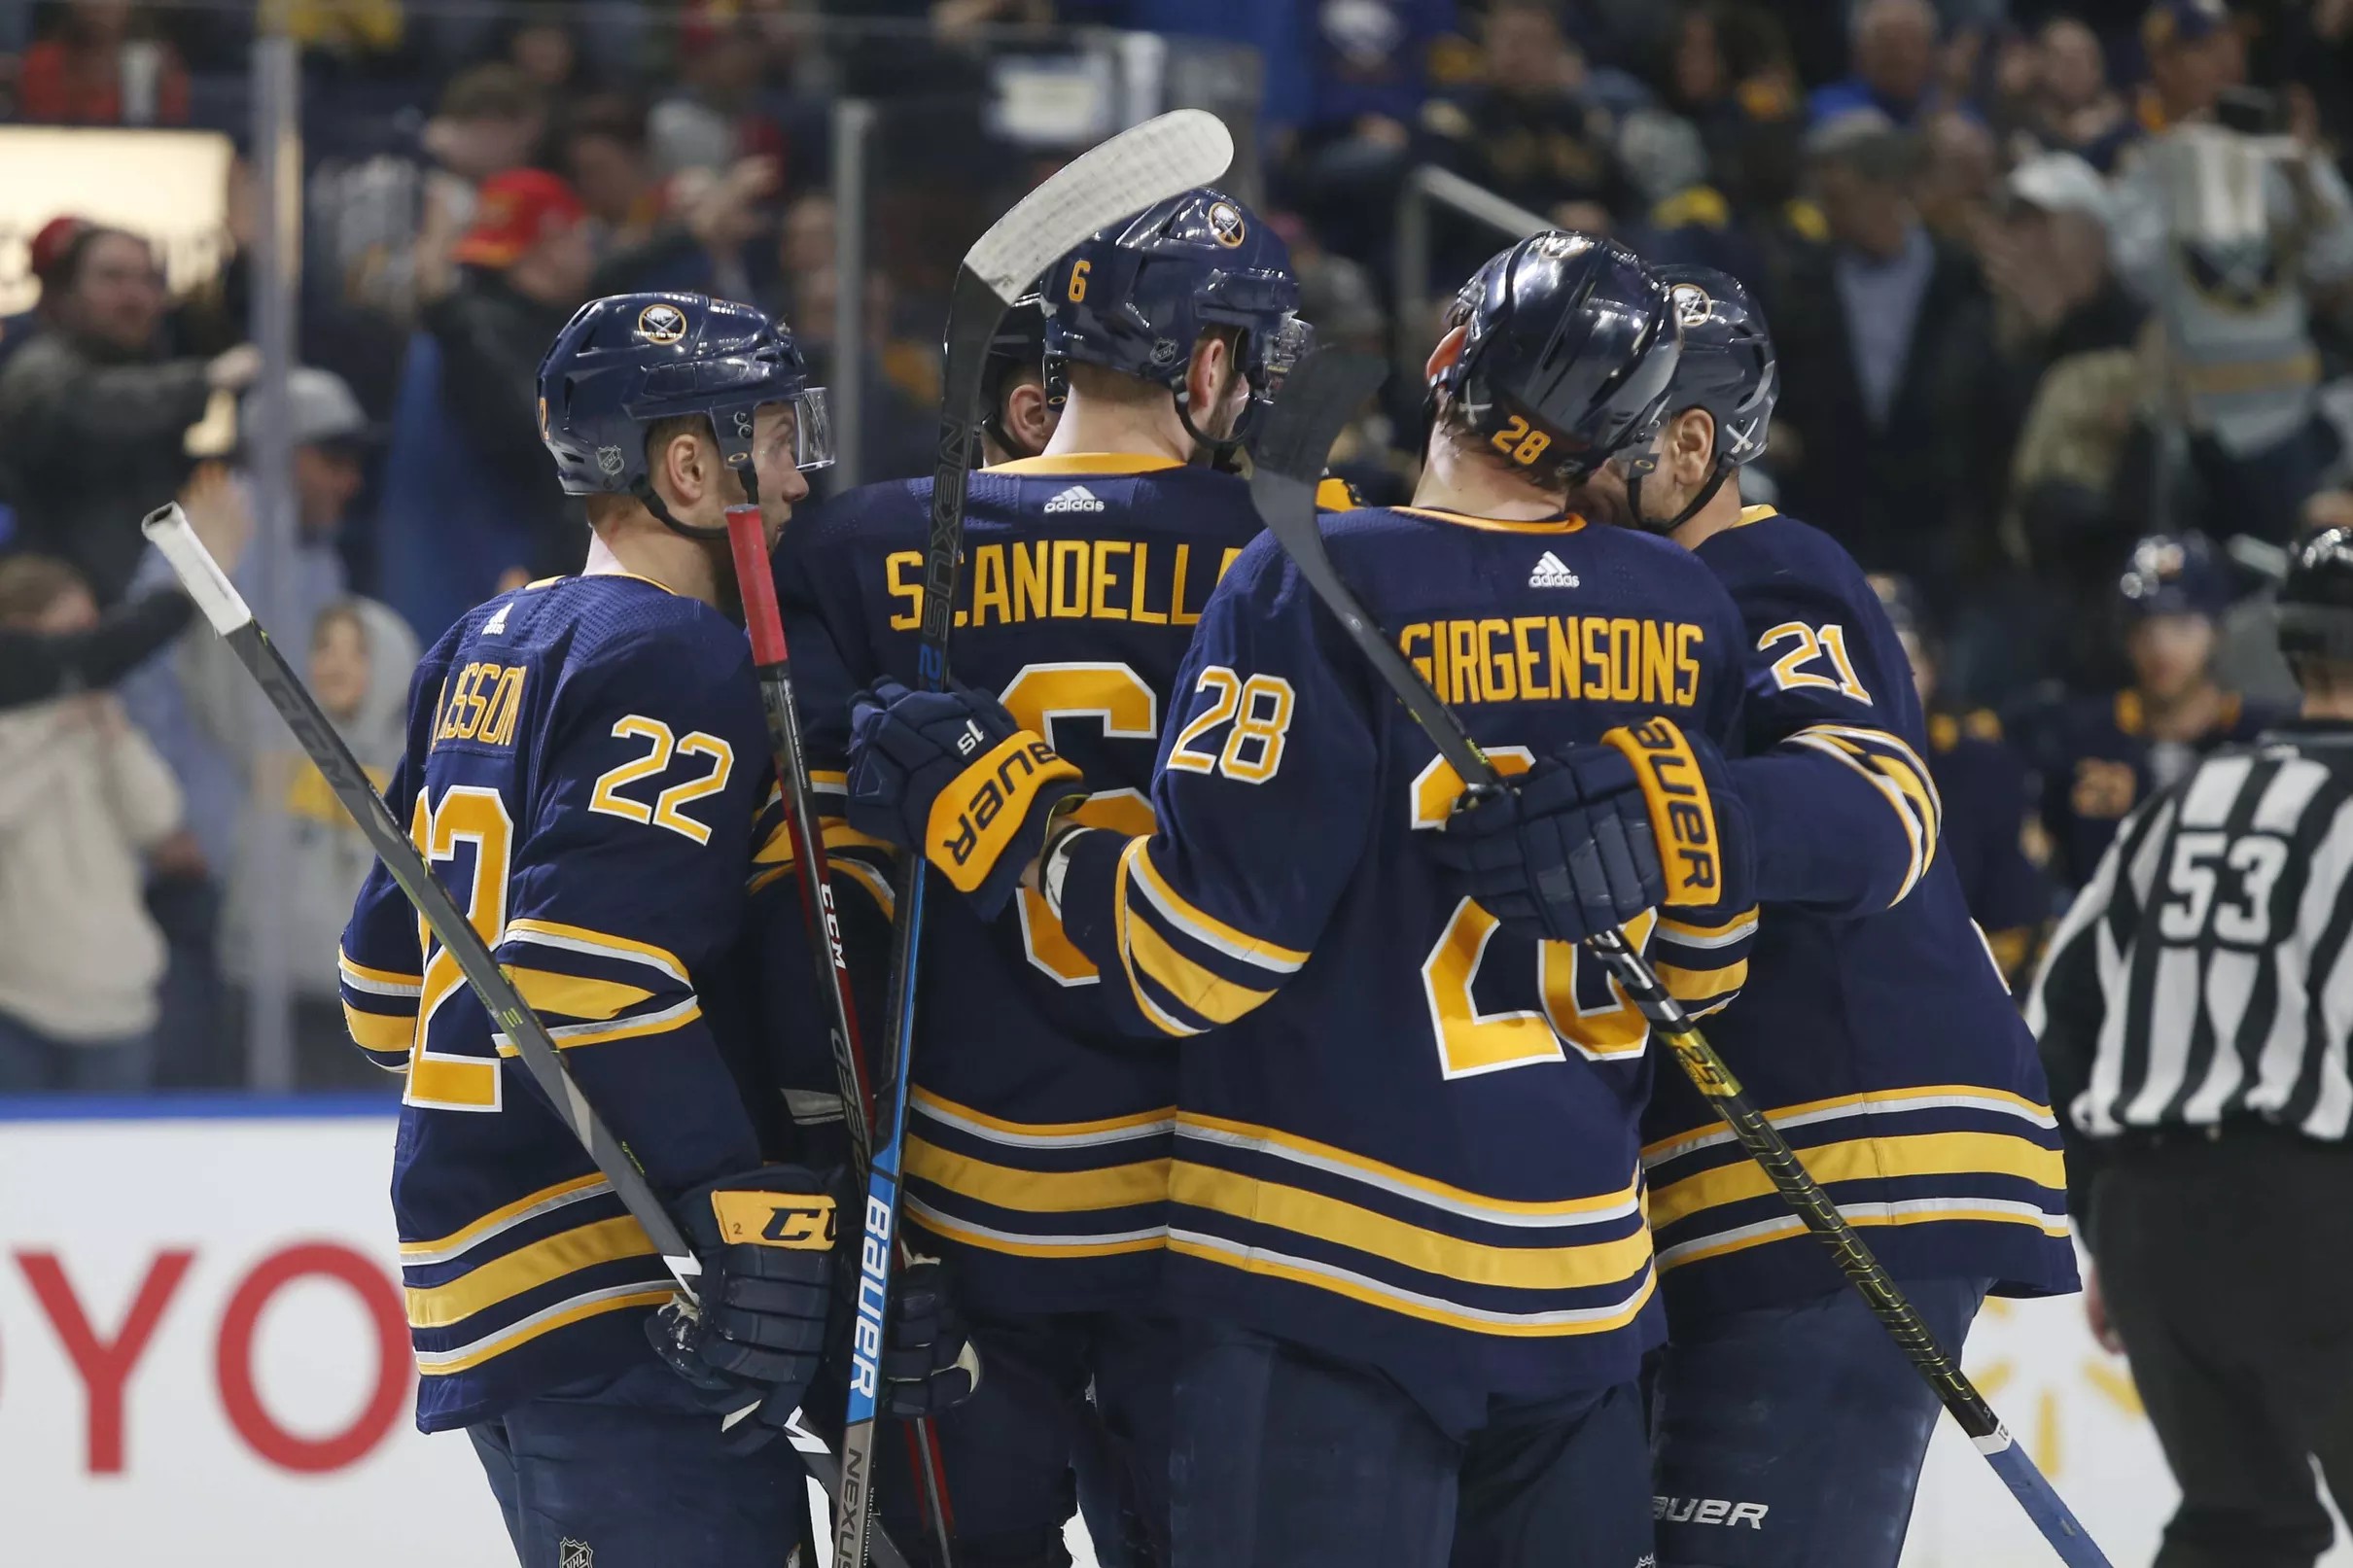 The Buffalo Sabres open training camp today and have a handful of